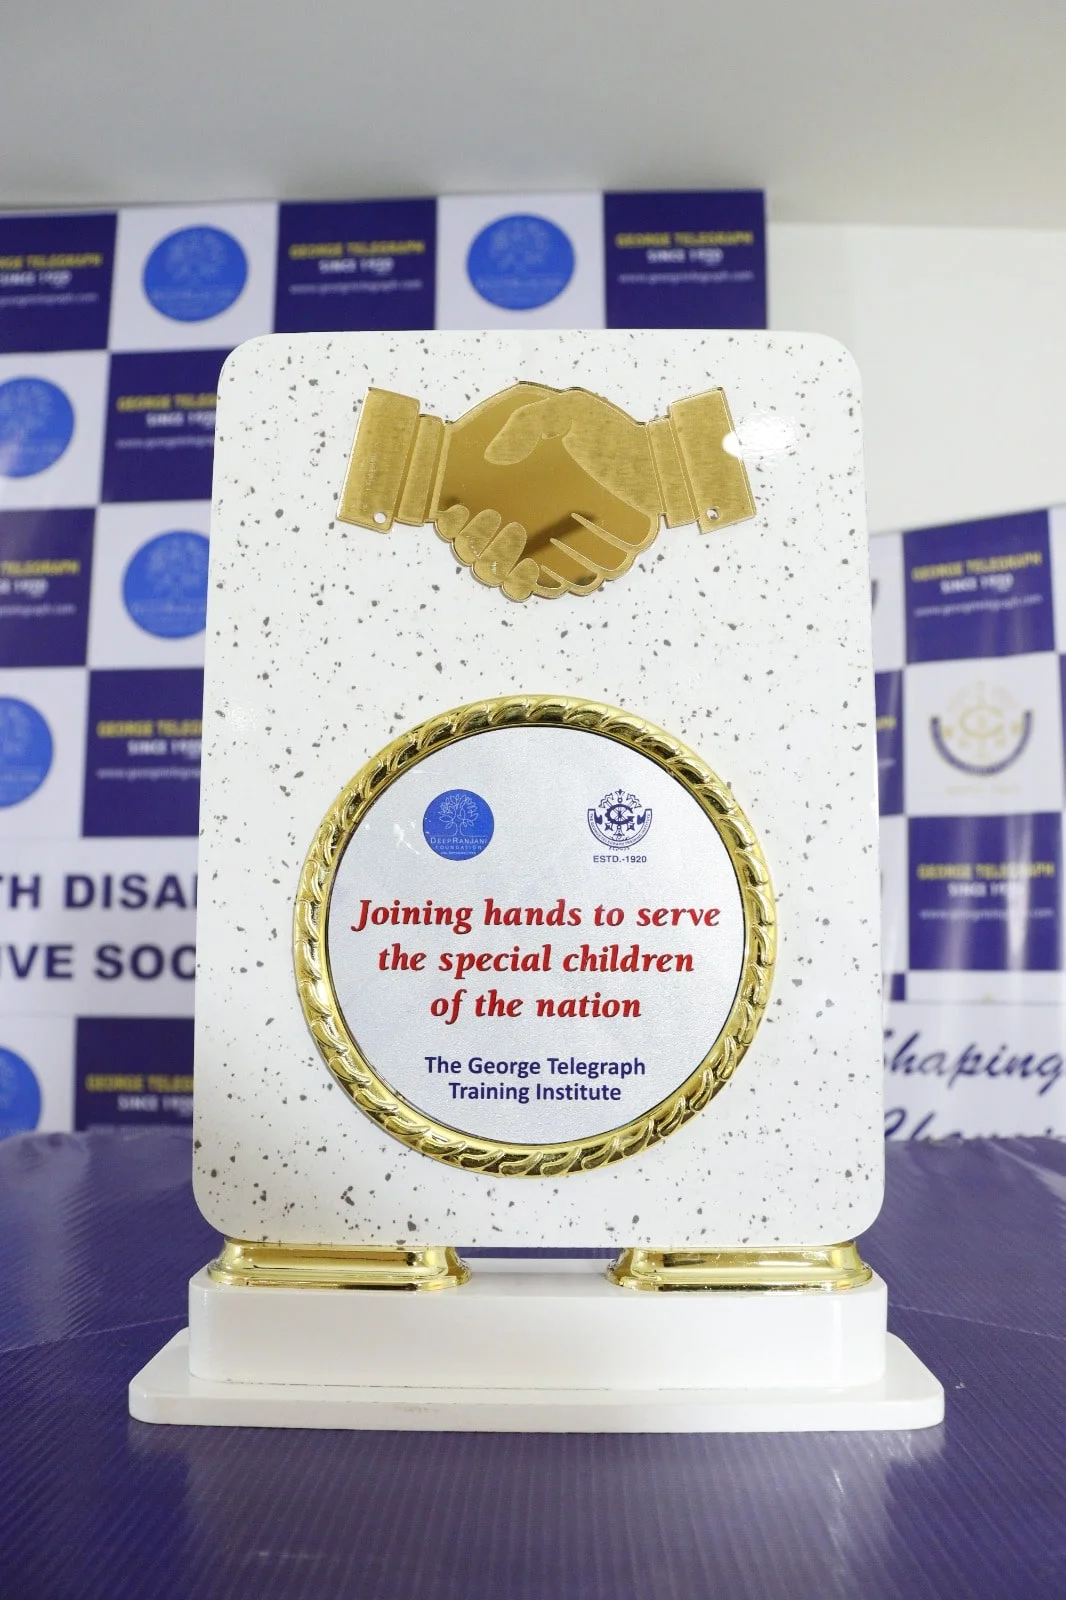 Award by The George Telegraph Training Institute